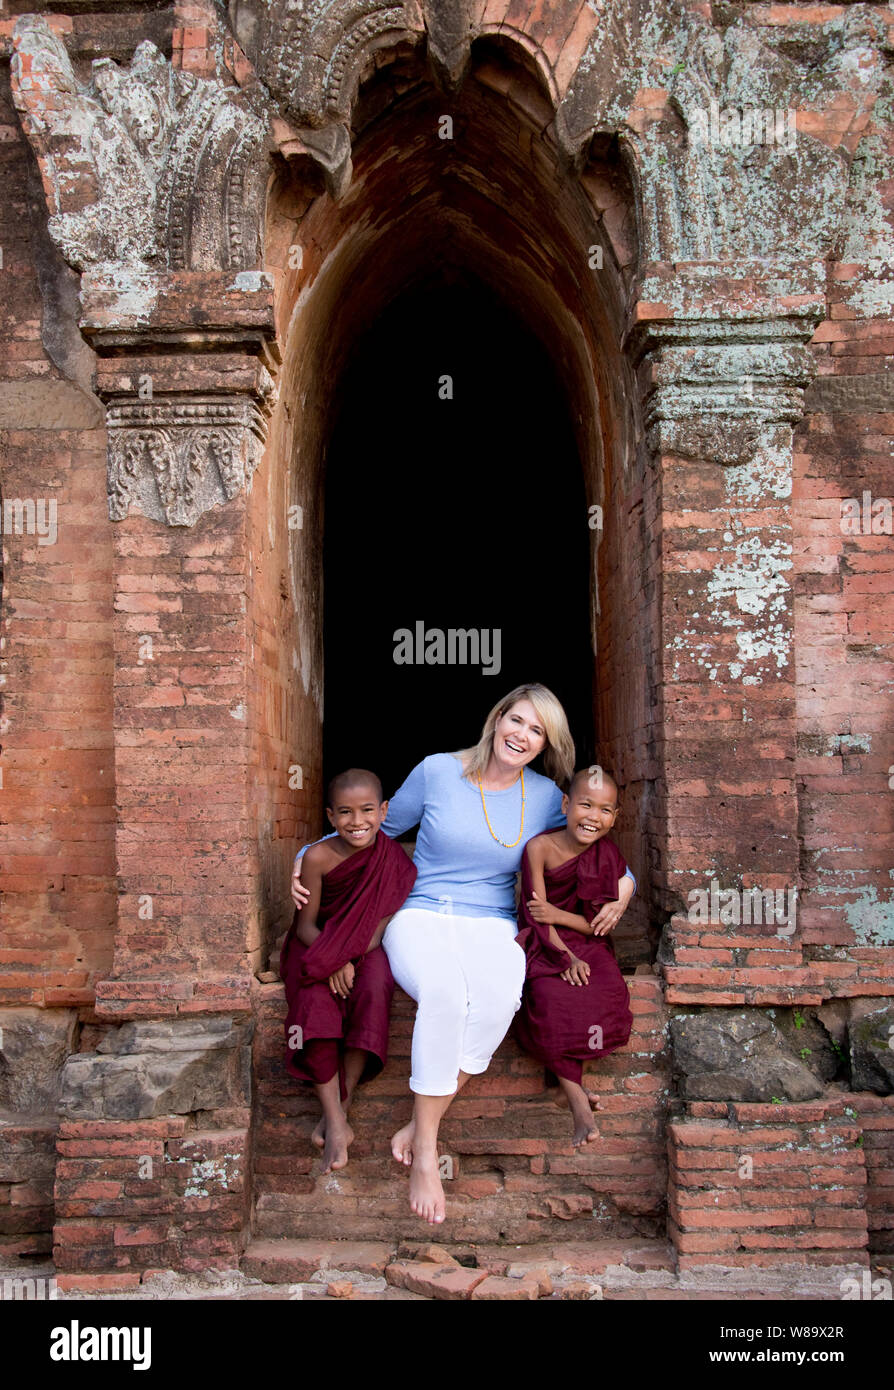 A Caucasian Female Tourist and Two Burmese Buddhist Novice Monks in an Ancient Temple Laughing at Camera in Bagan Myanmar  and Tourist is Released. Stock Photo